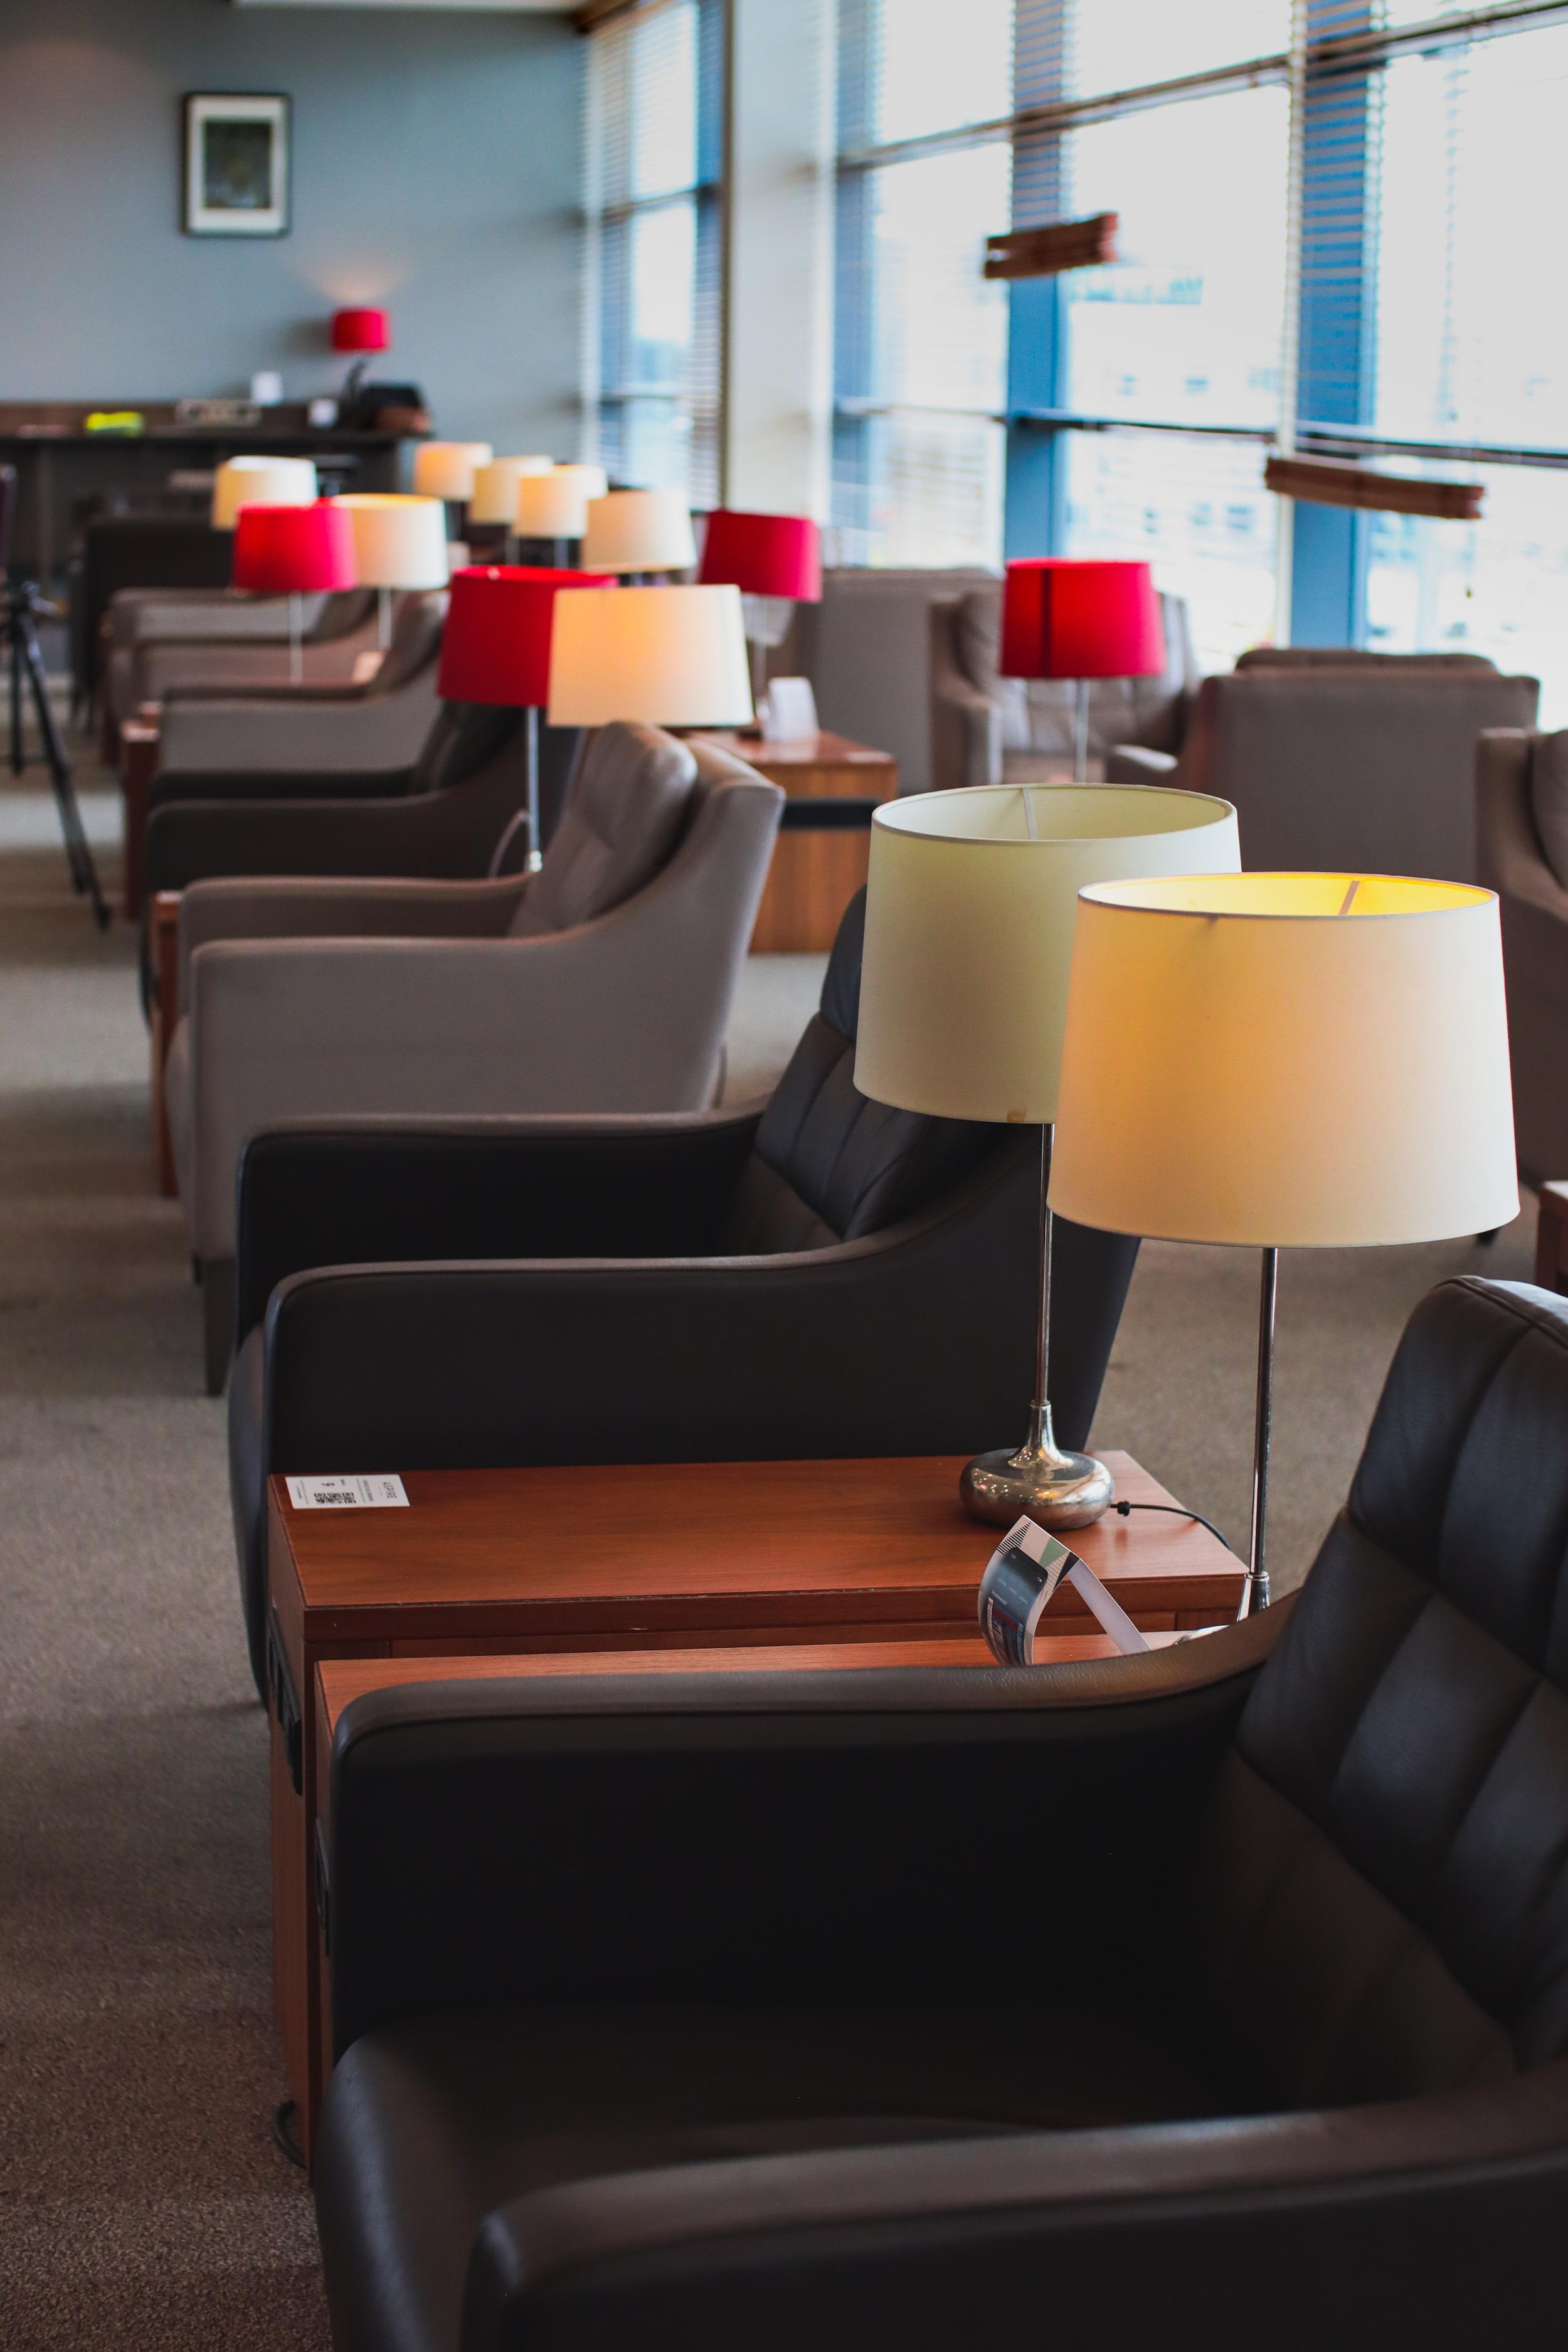 No1 Airport Lounges